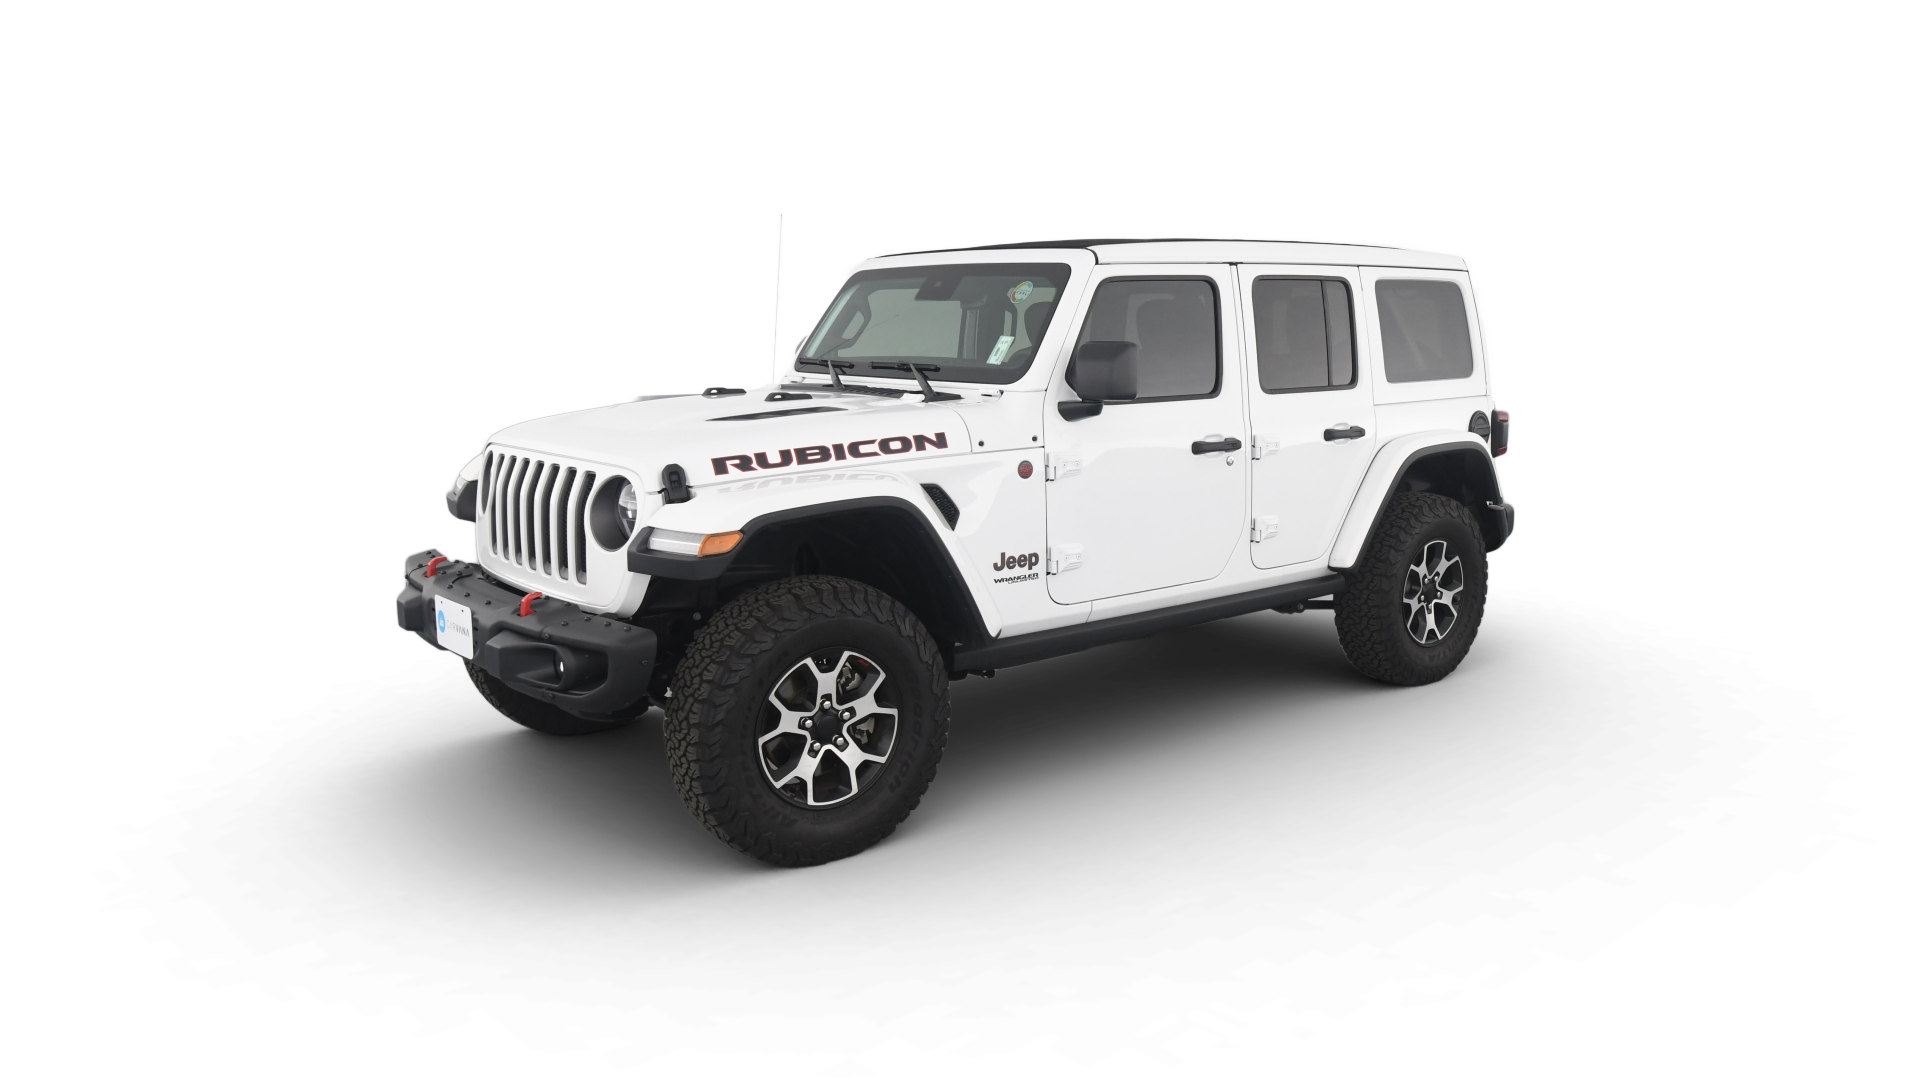 Used White Jeep Rubicon For Sale Online | Carvana